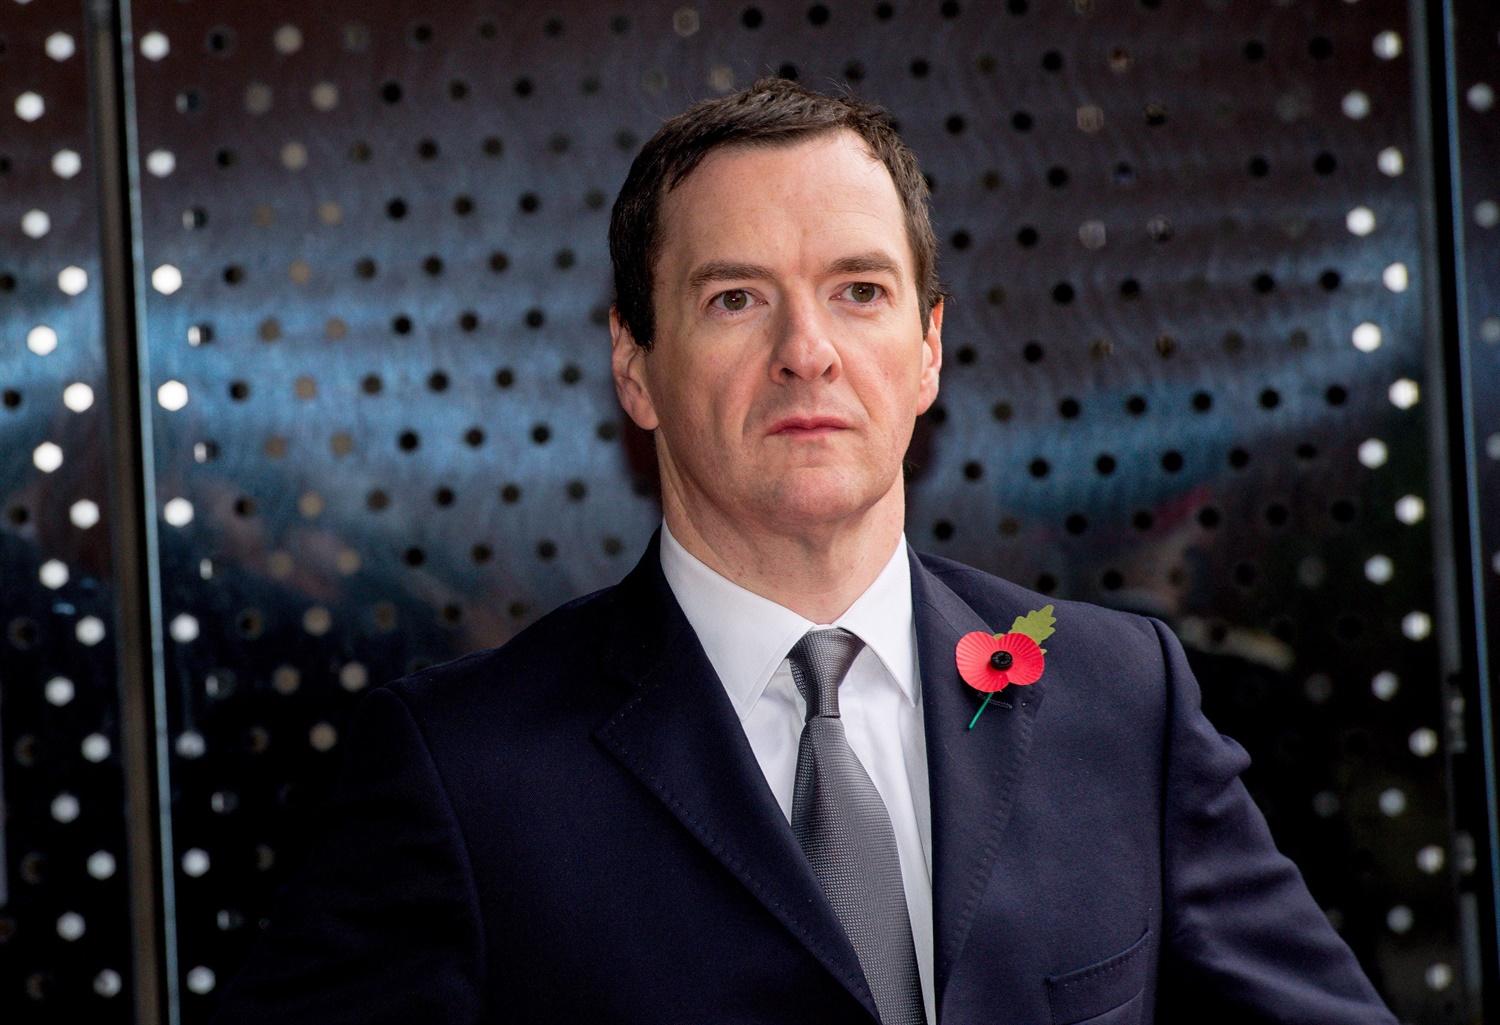 Capital spending increase means HS2 construction can begin – Osborne